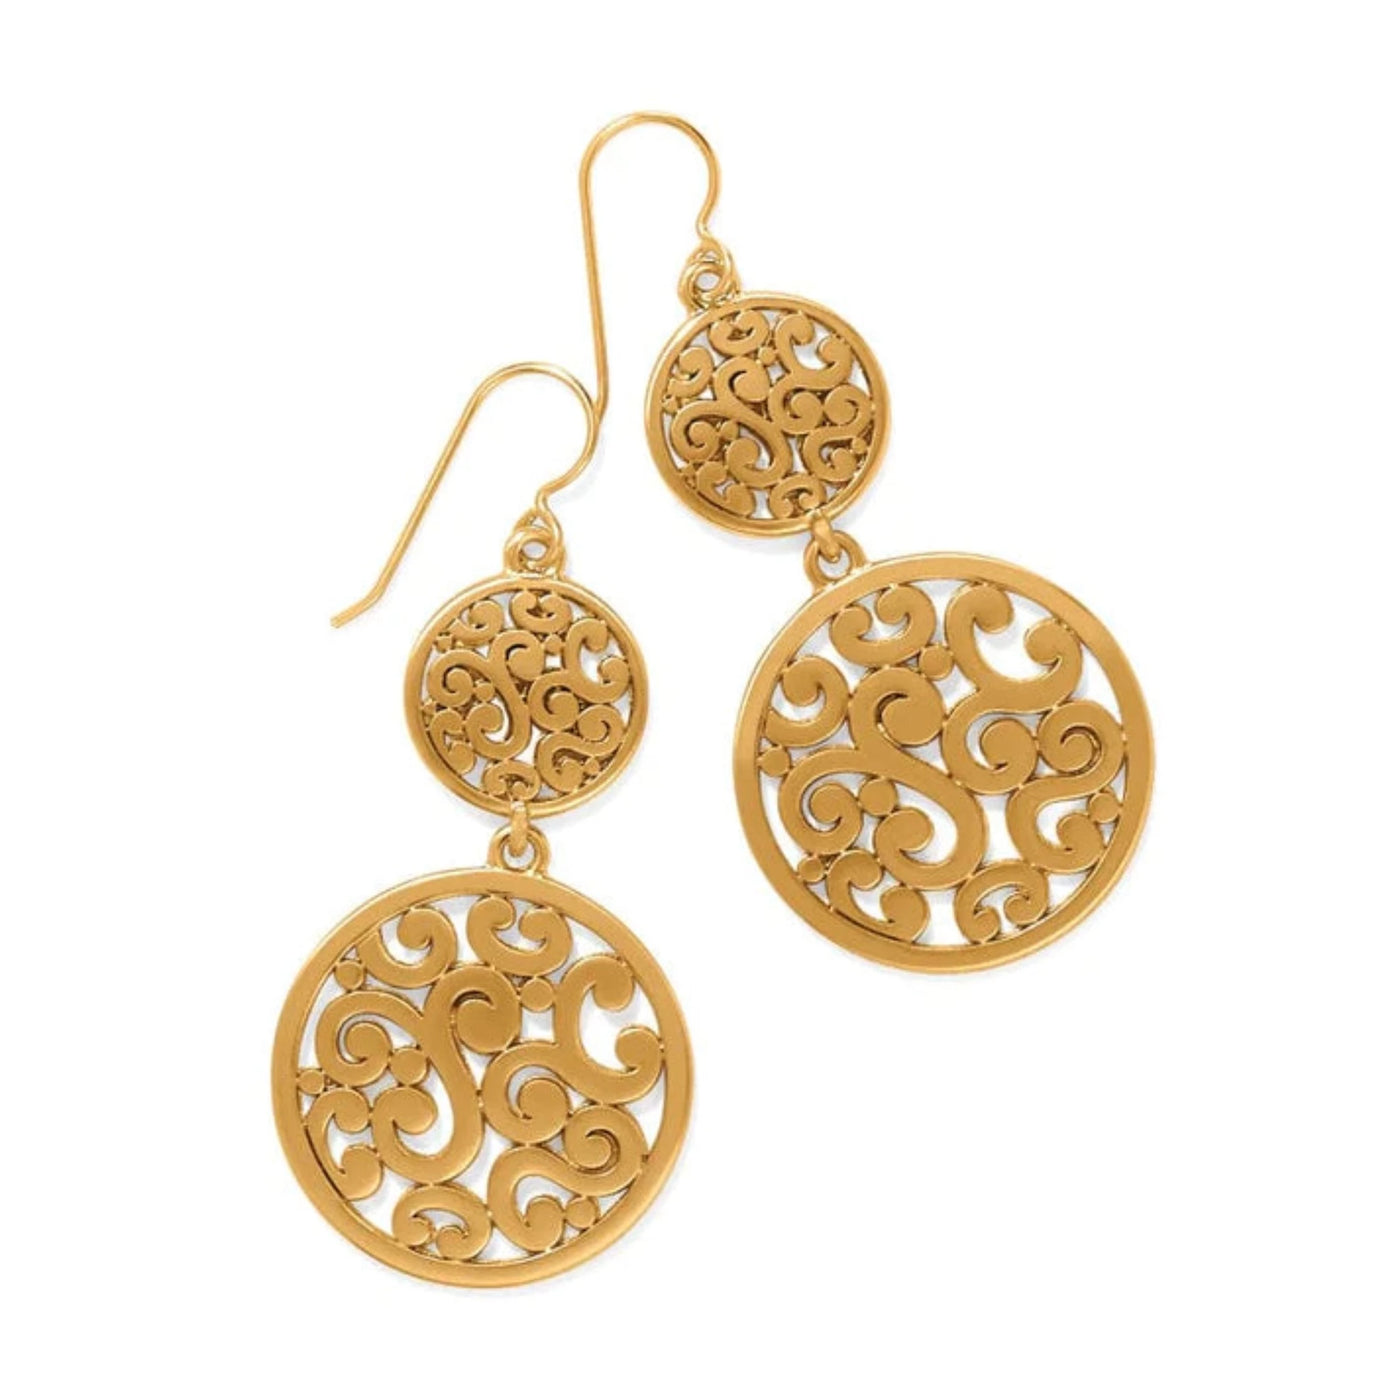 Brighton - Contempo Medallion Duo French Wire Earrings